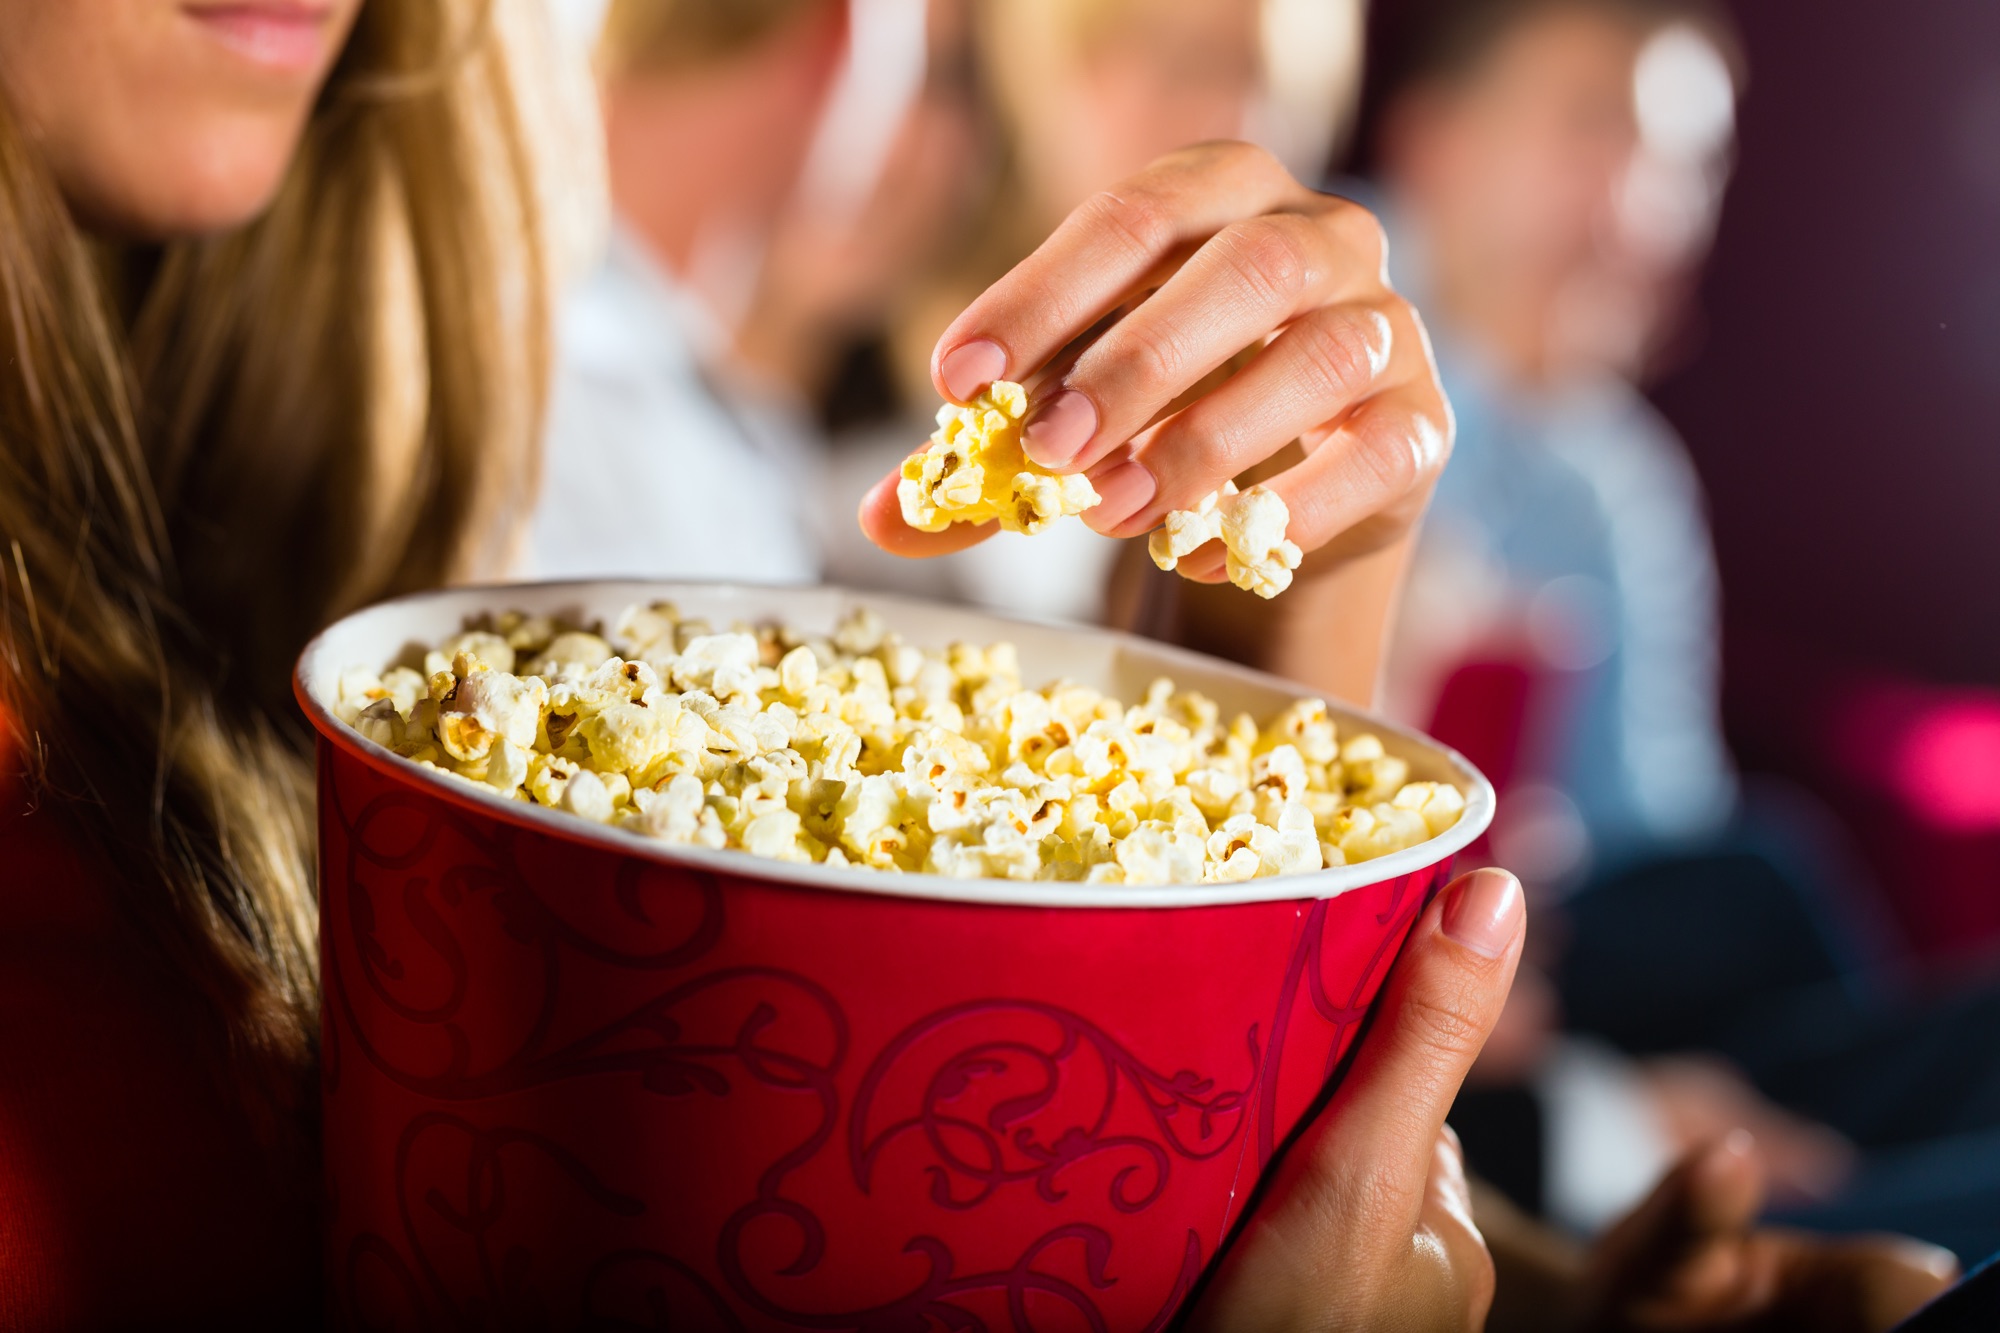 Movie Night Snacks: 11 Crave-Worthy Low-Carb Options